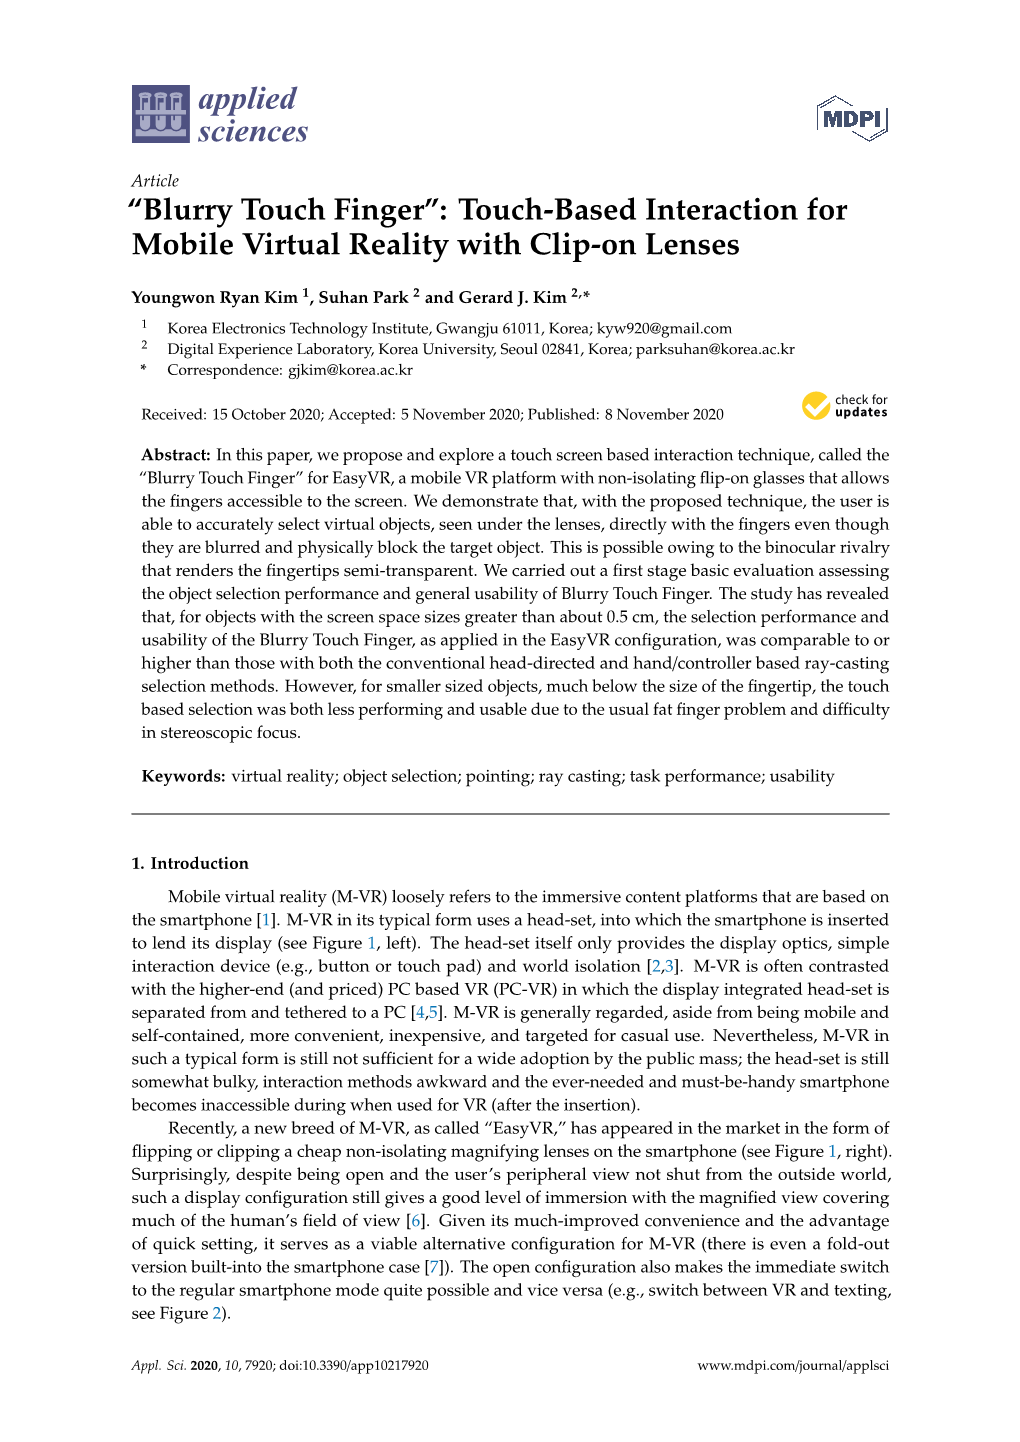 Touch-Based Interaction for Mobile Virtual Reality with Clip-On Lenses